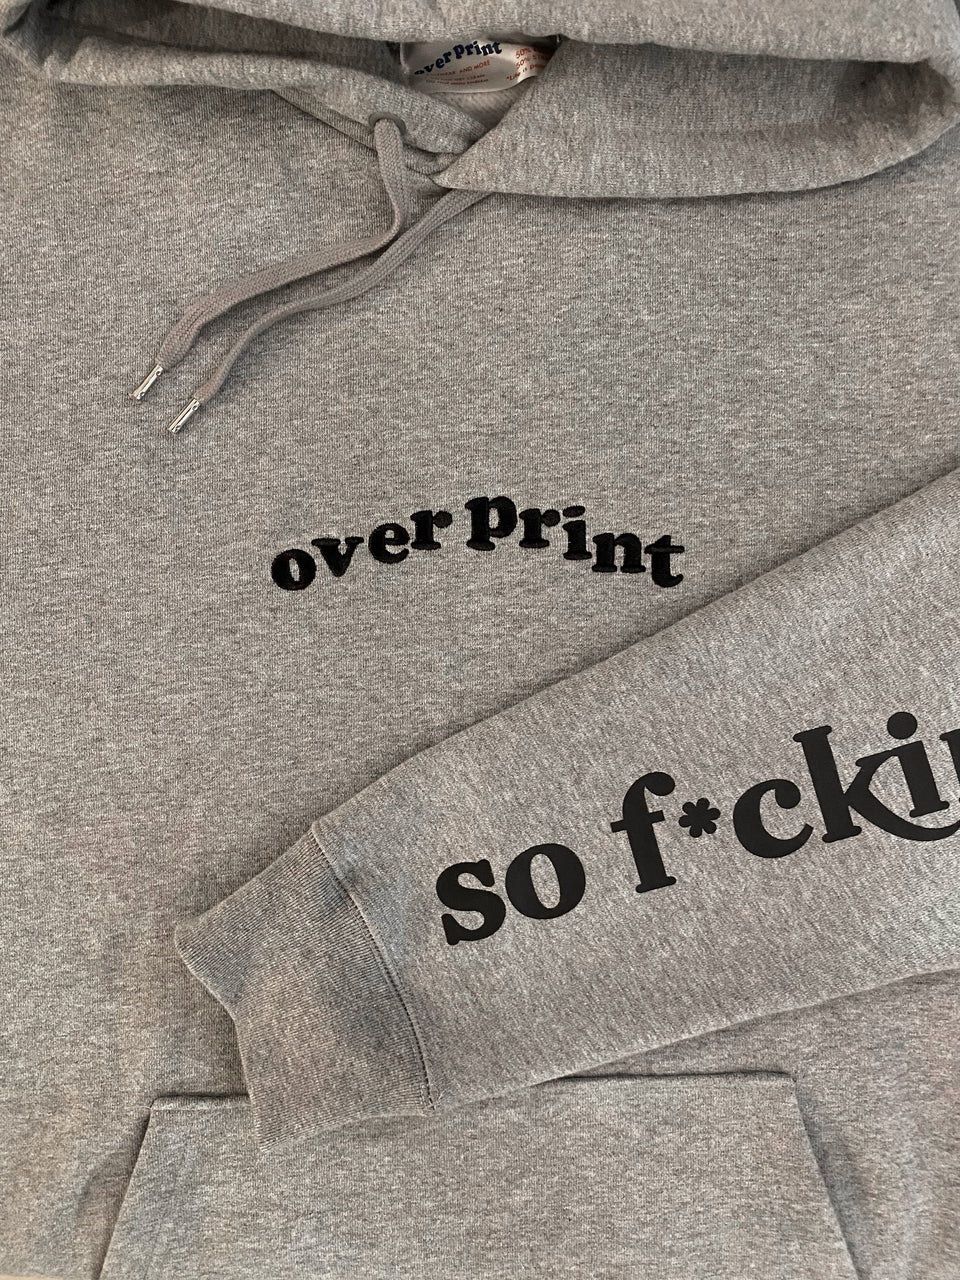 Over Print So What Hoodie